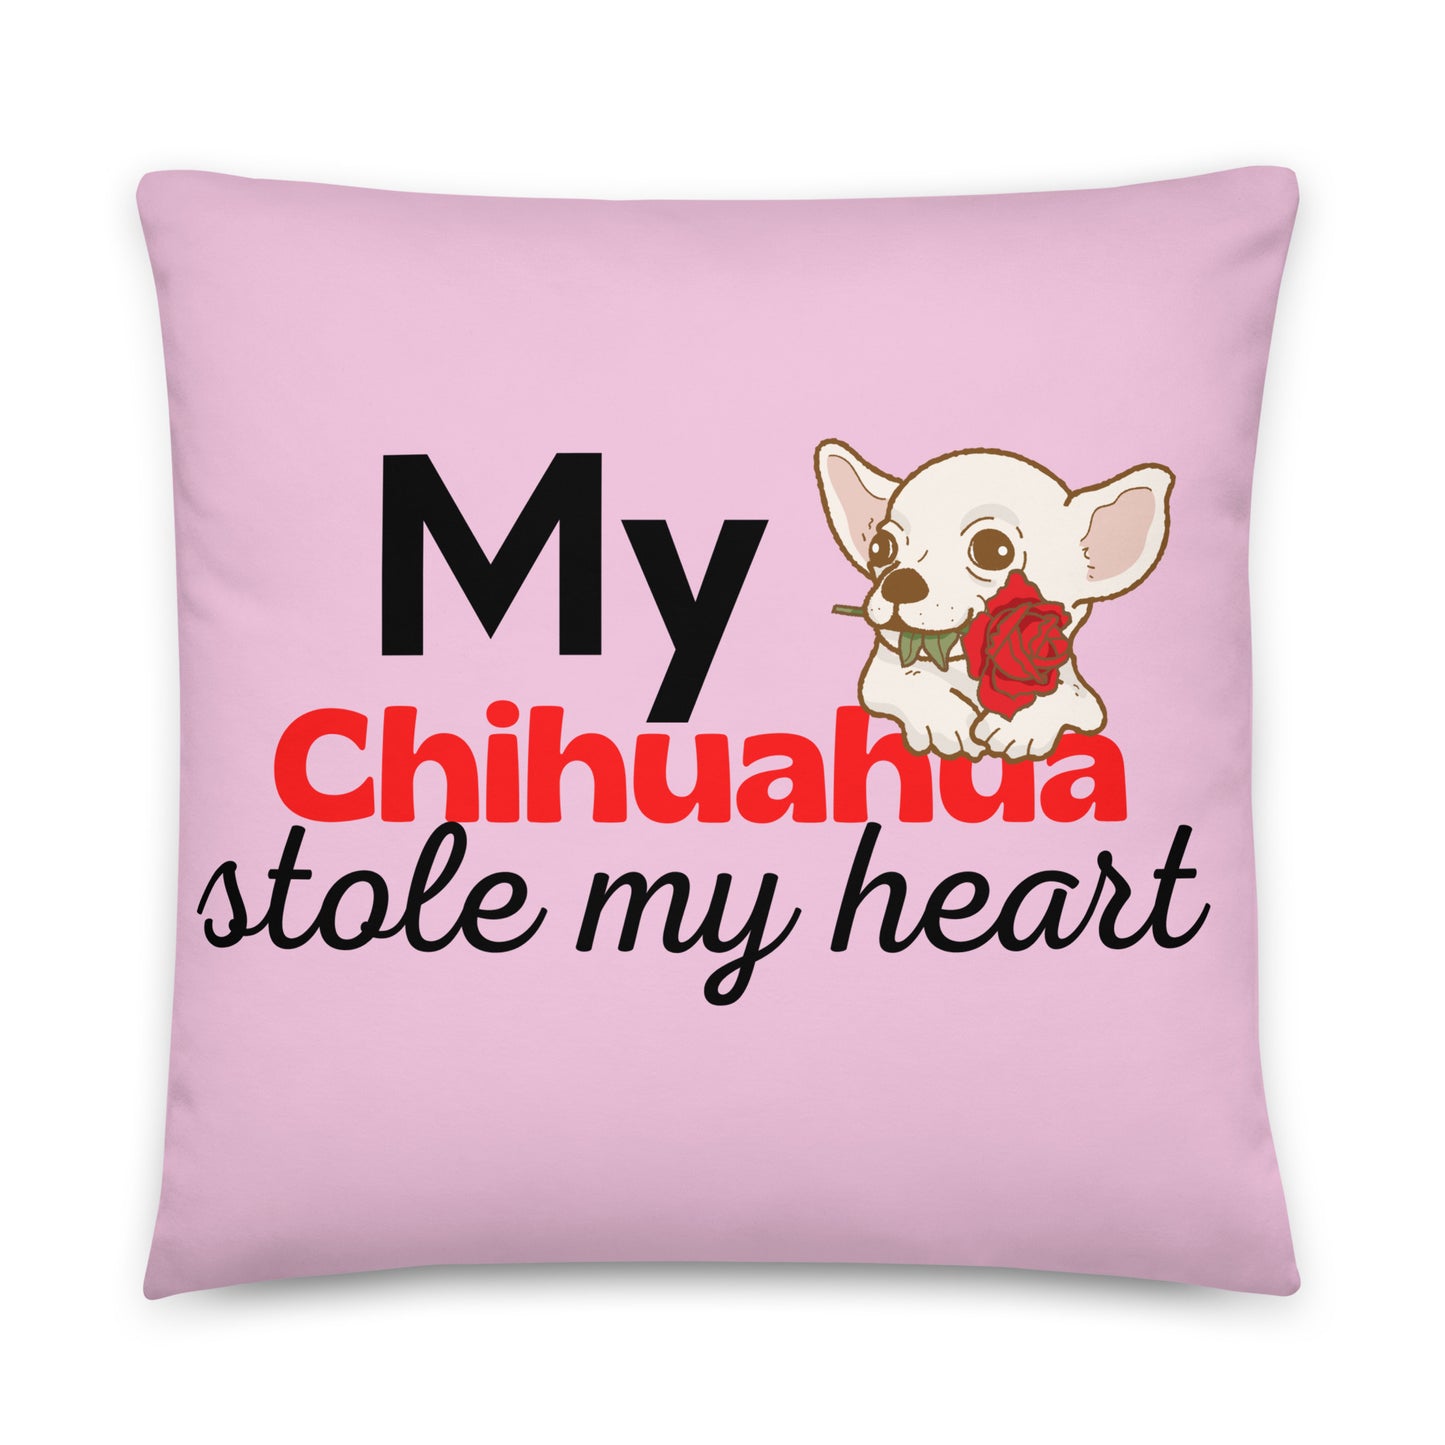 Pink Pillow 'My Chihuahua stole my heart'